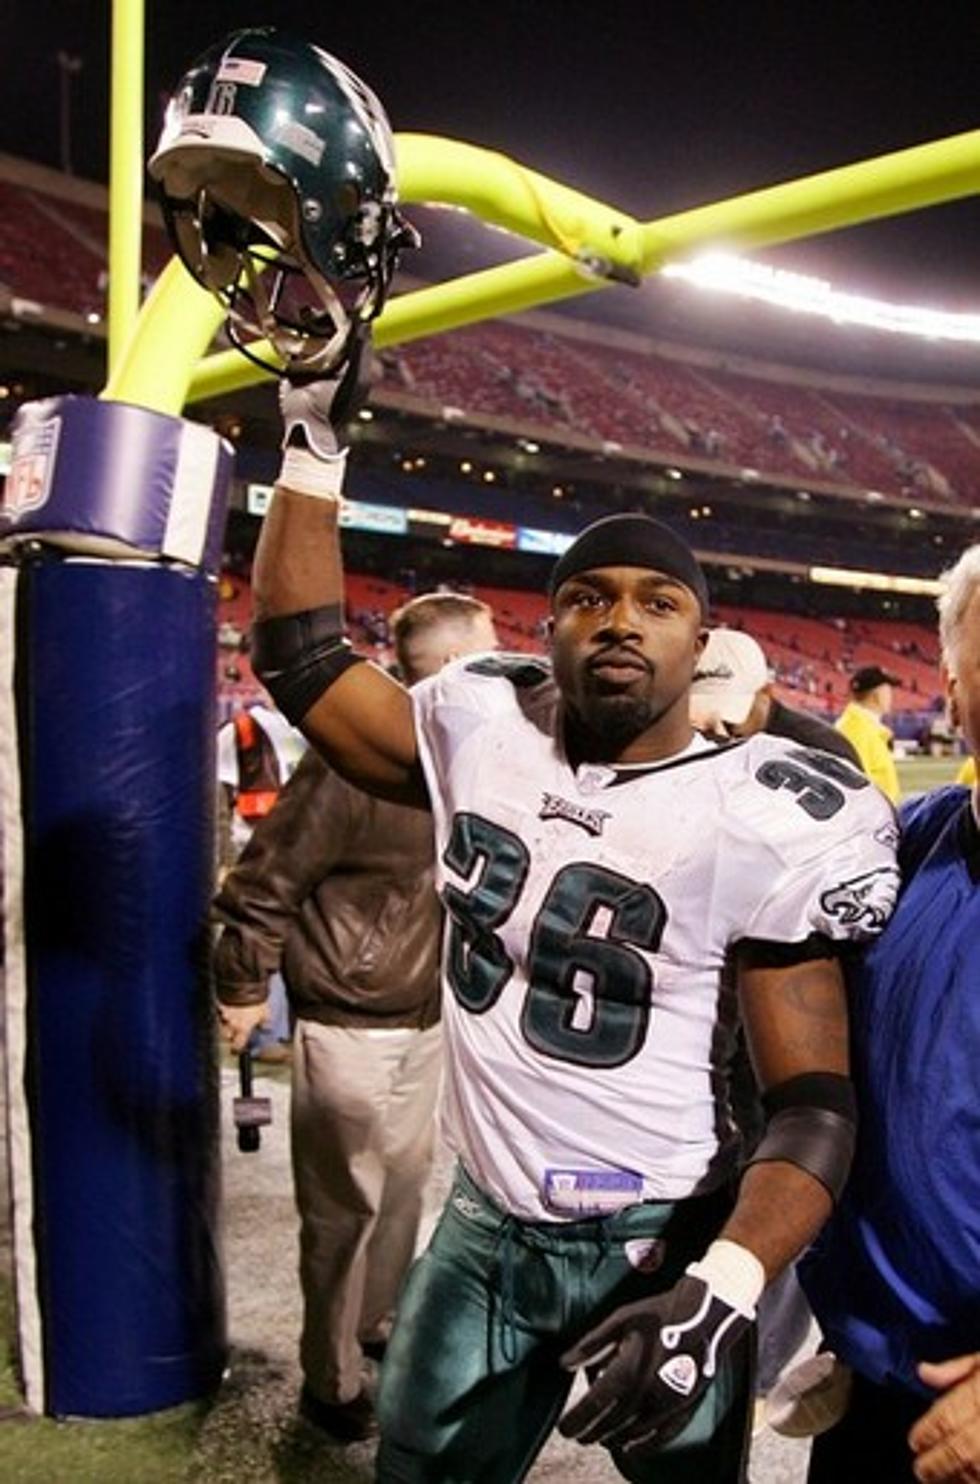 Brian Westbrook, Baughan to Be Inducted Into Eagles Hall of Fame